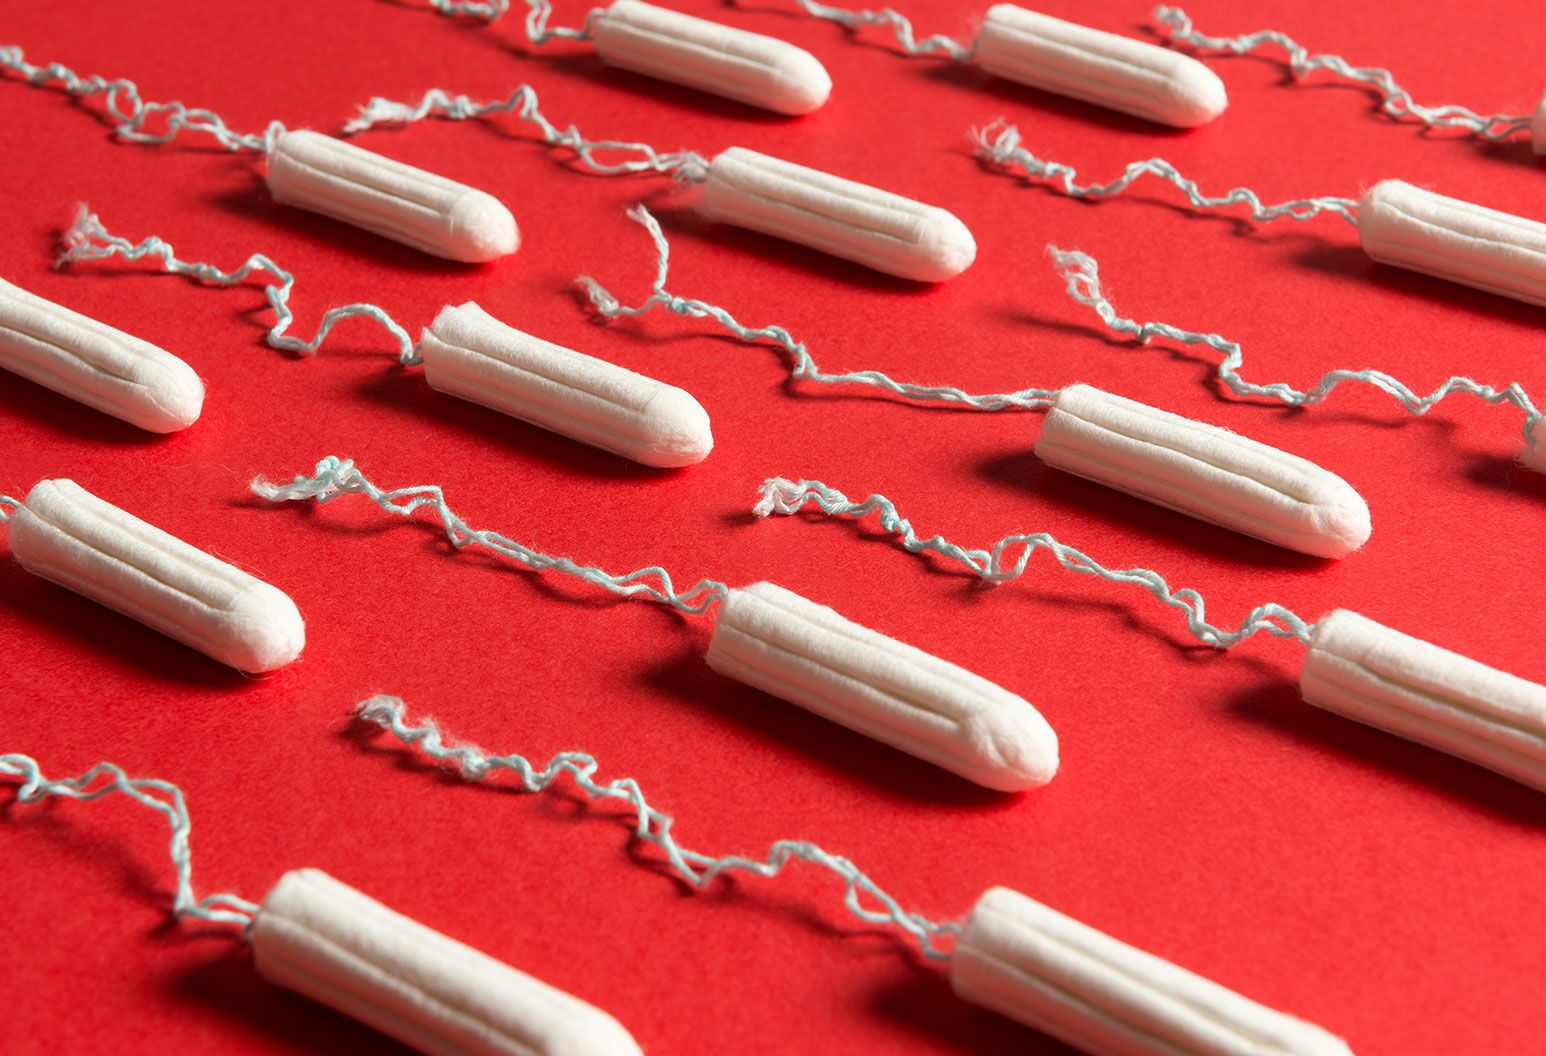 Toxic Shock Syndrome Is Rare. Here's What Tampon Users Should Know.